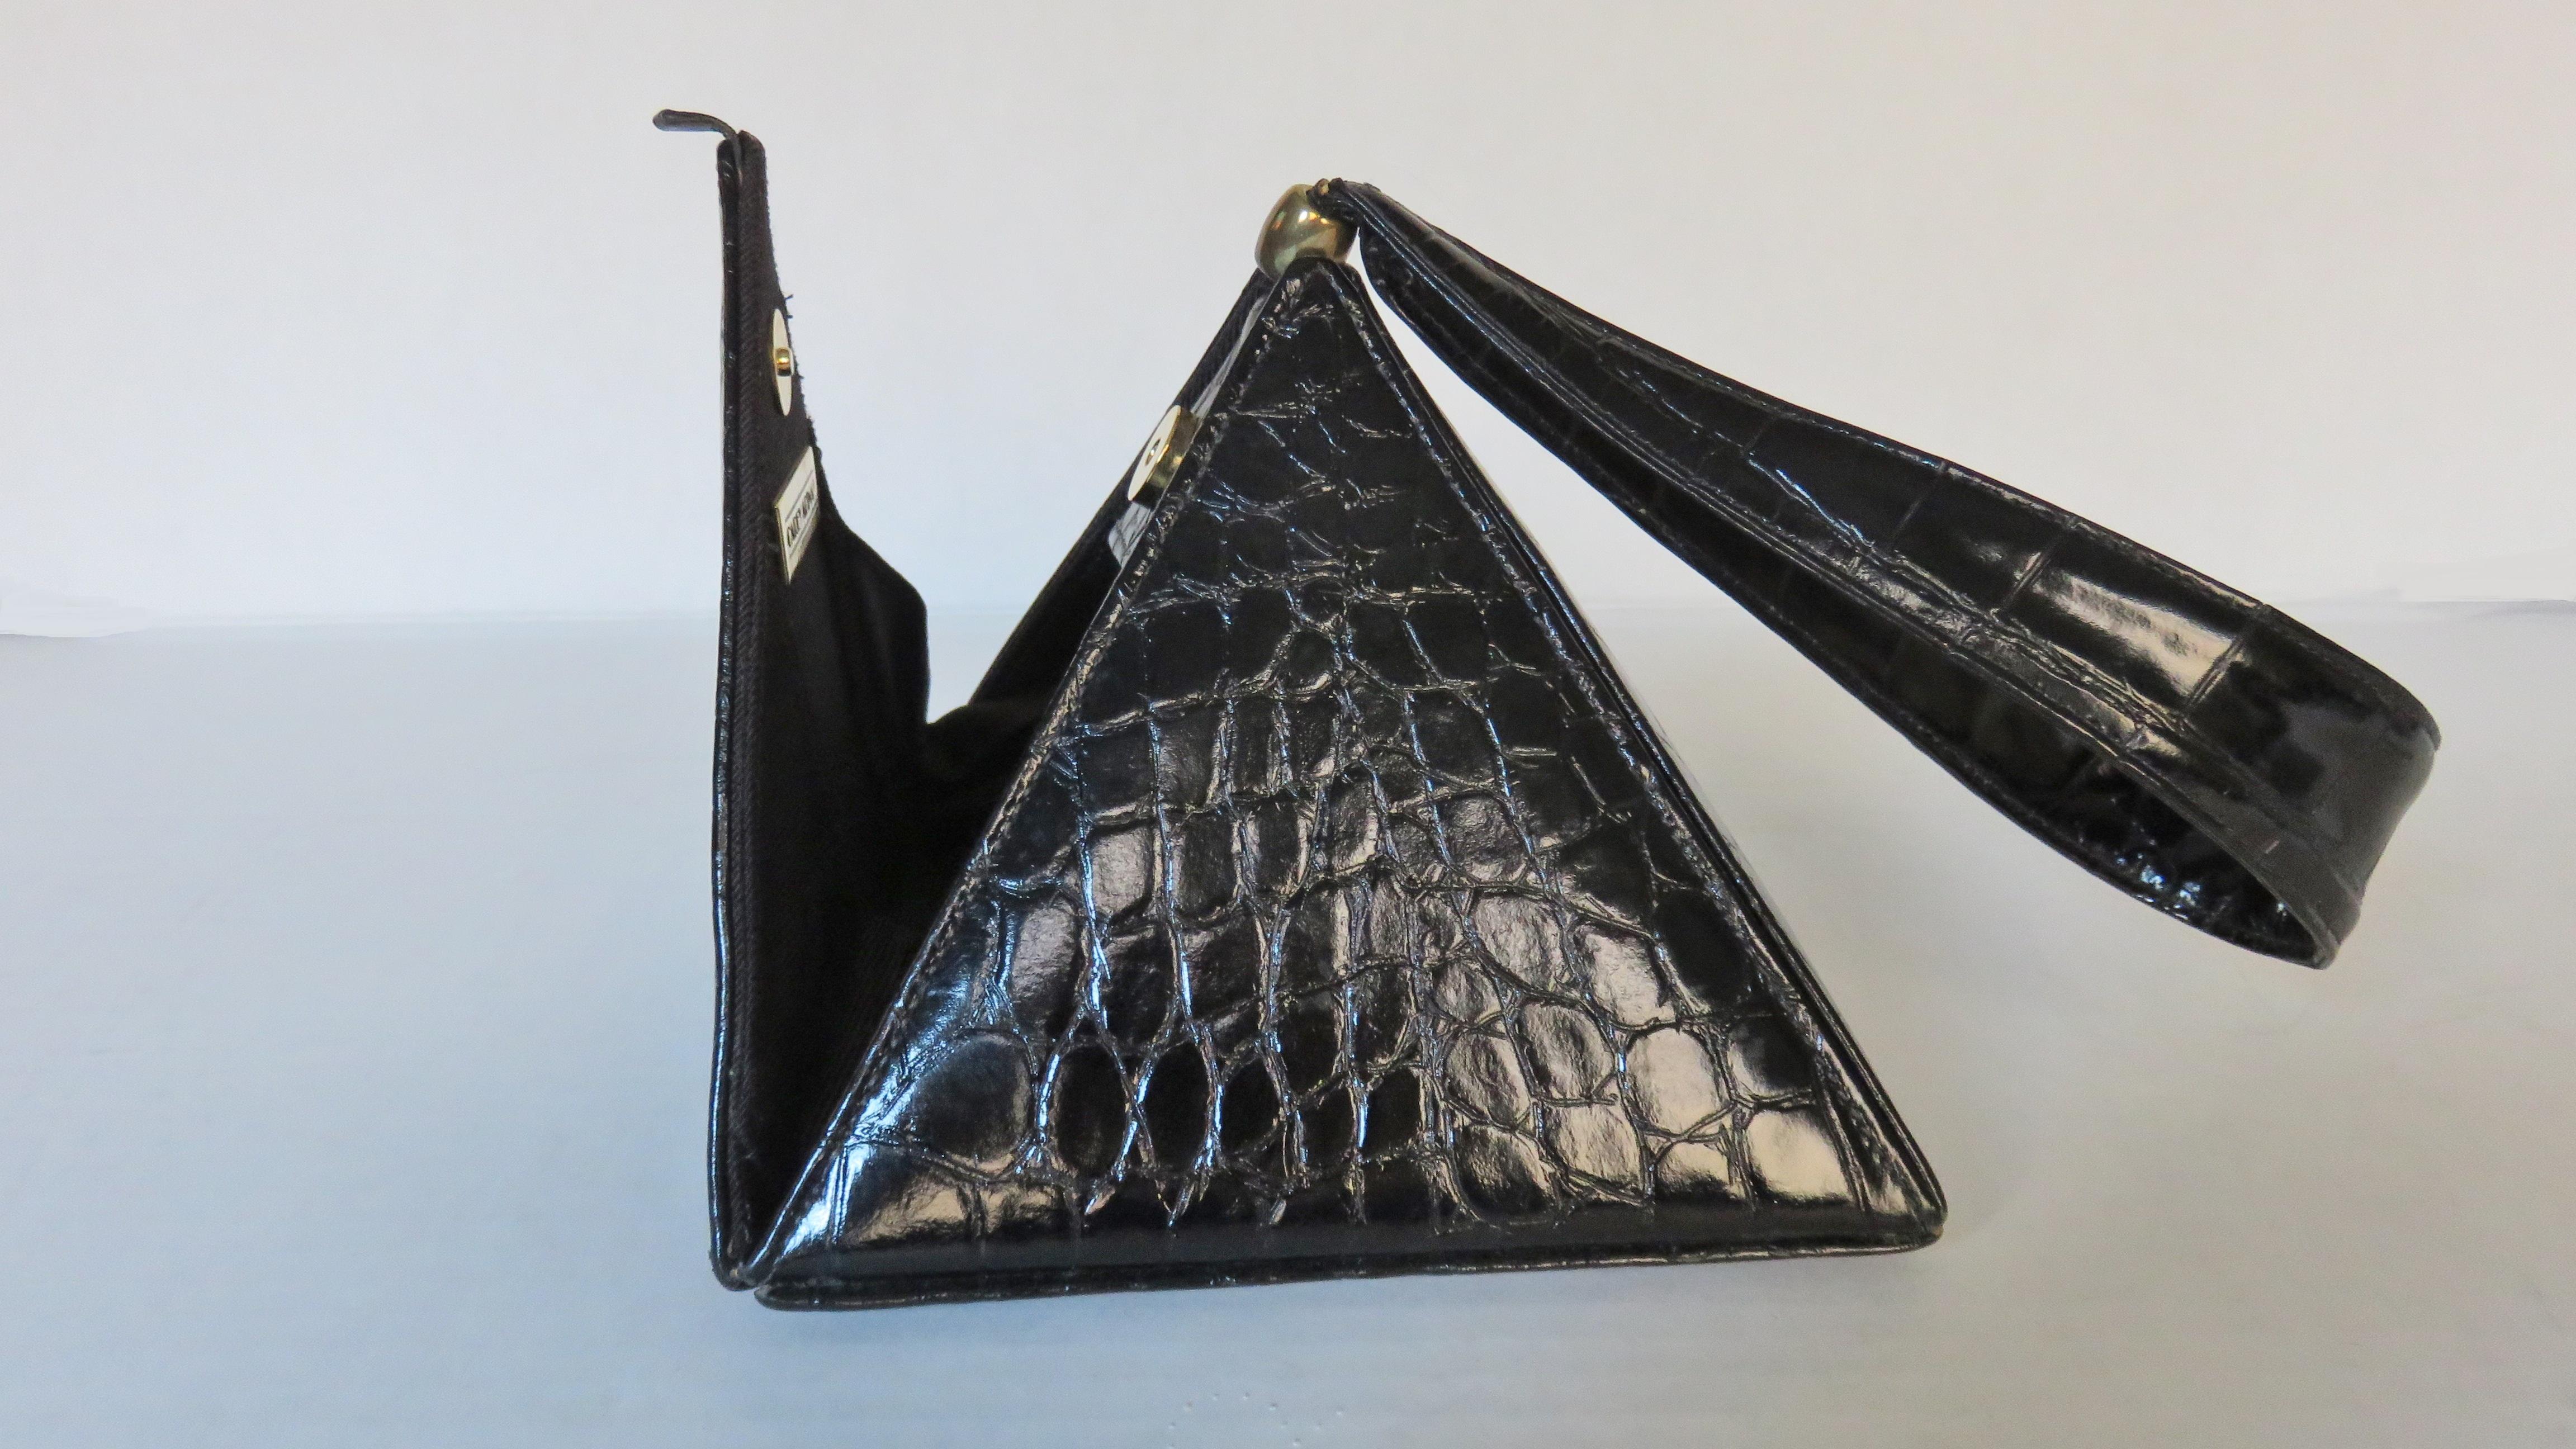 Carey Adina New Alligator Embossed Leather Pyramid Bag 1990s In New Condition For Sale In Water Mill, NY